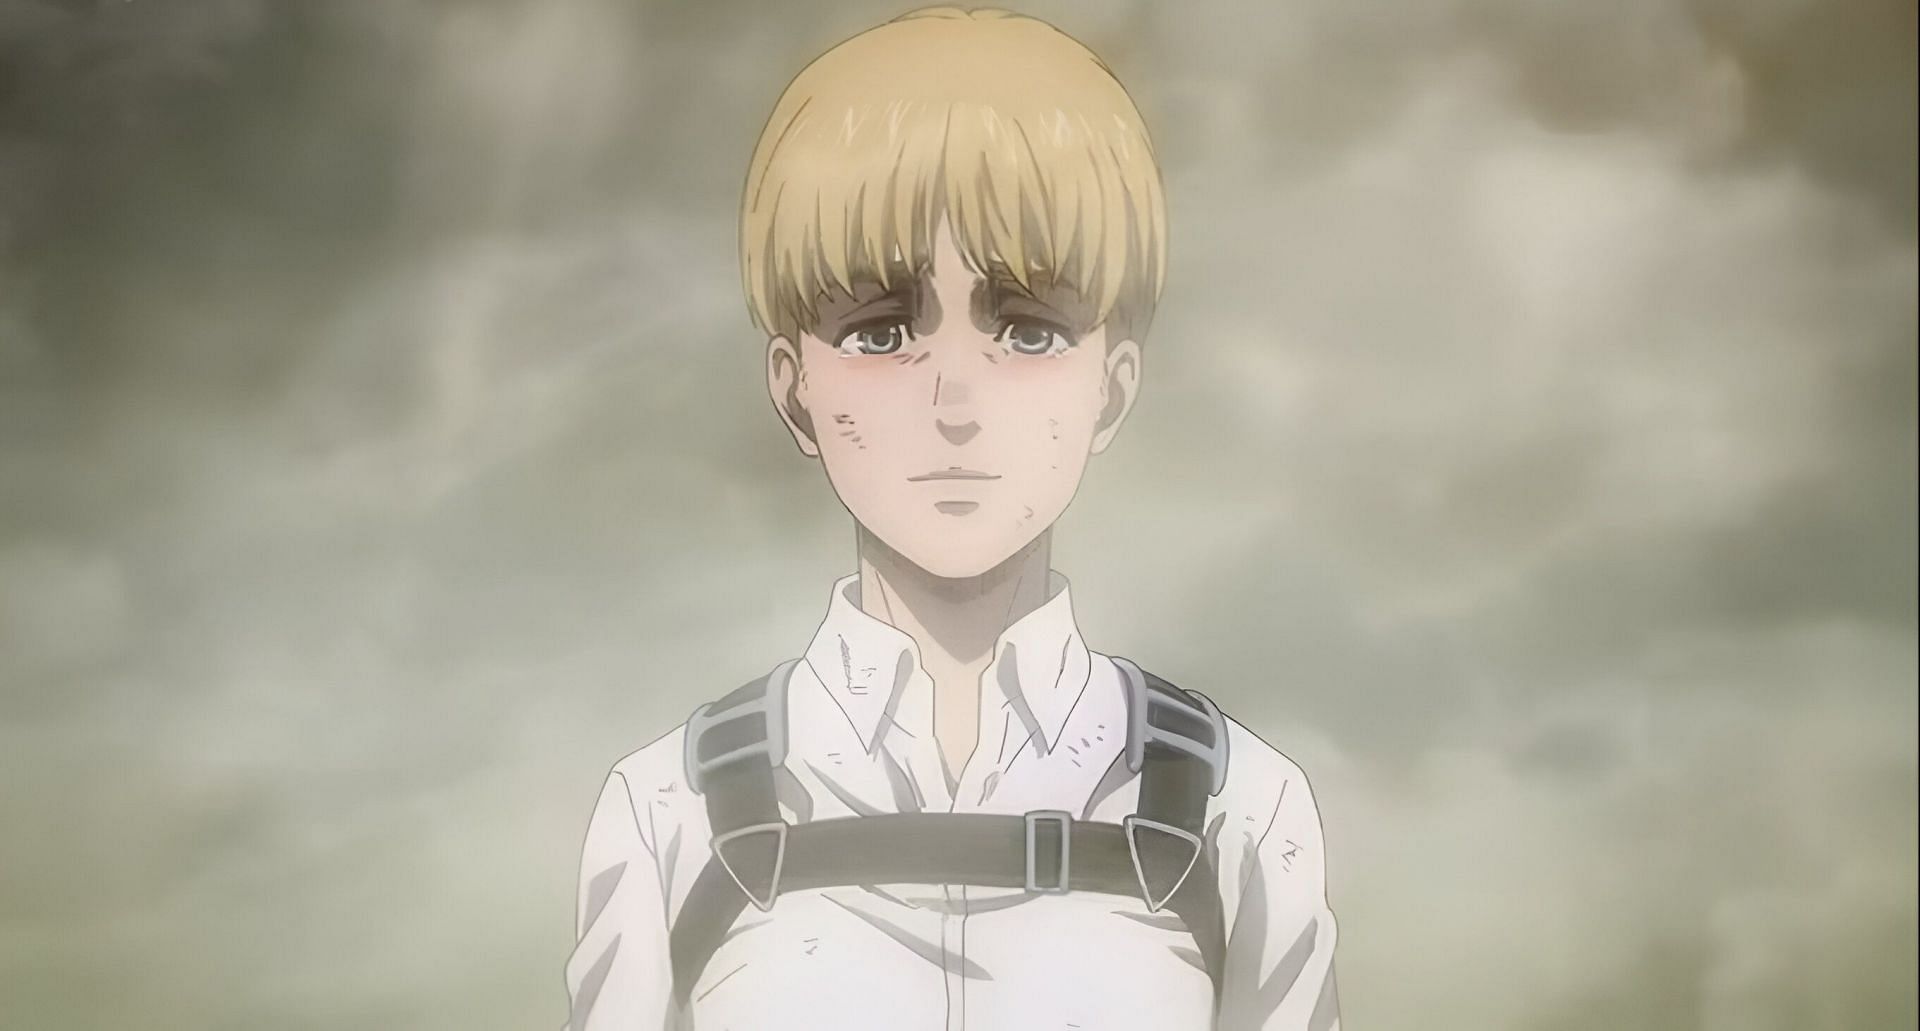 Armin as seen in the anime (Image via MAPPA)